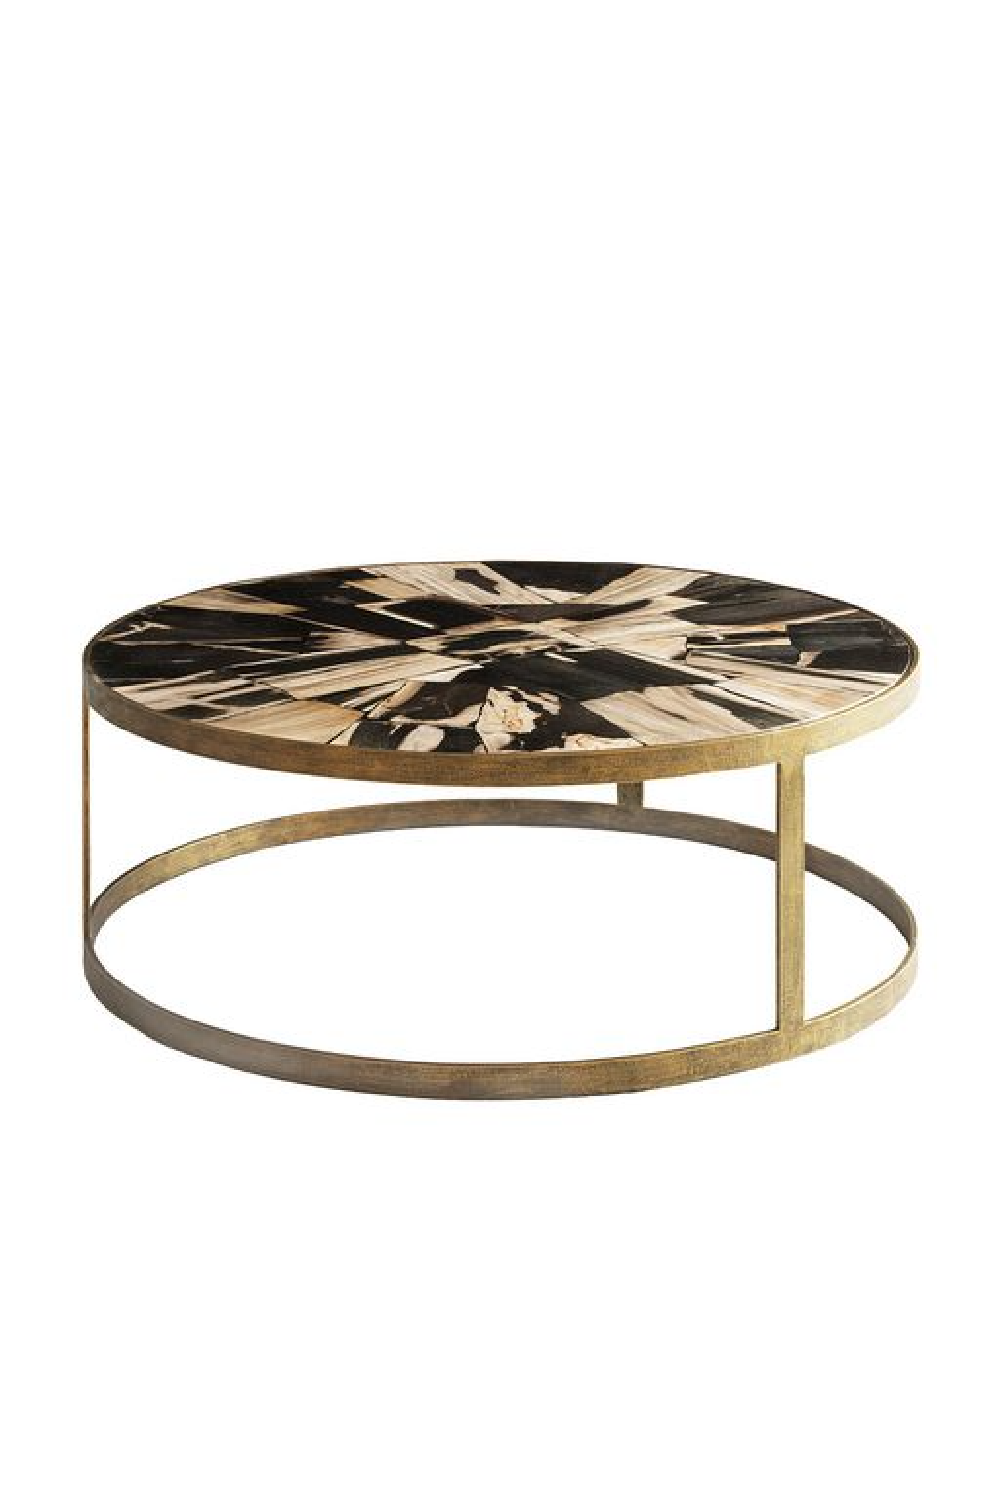 Brass Framed Round Wooden Coffee Table | Andrew Martin | OROA.com